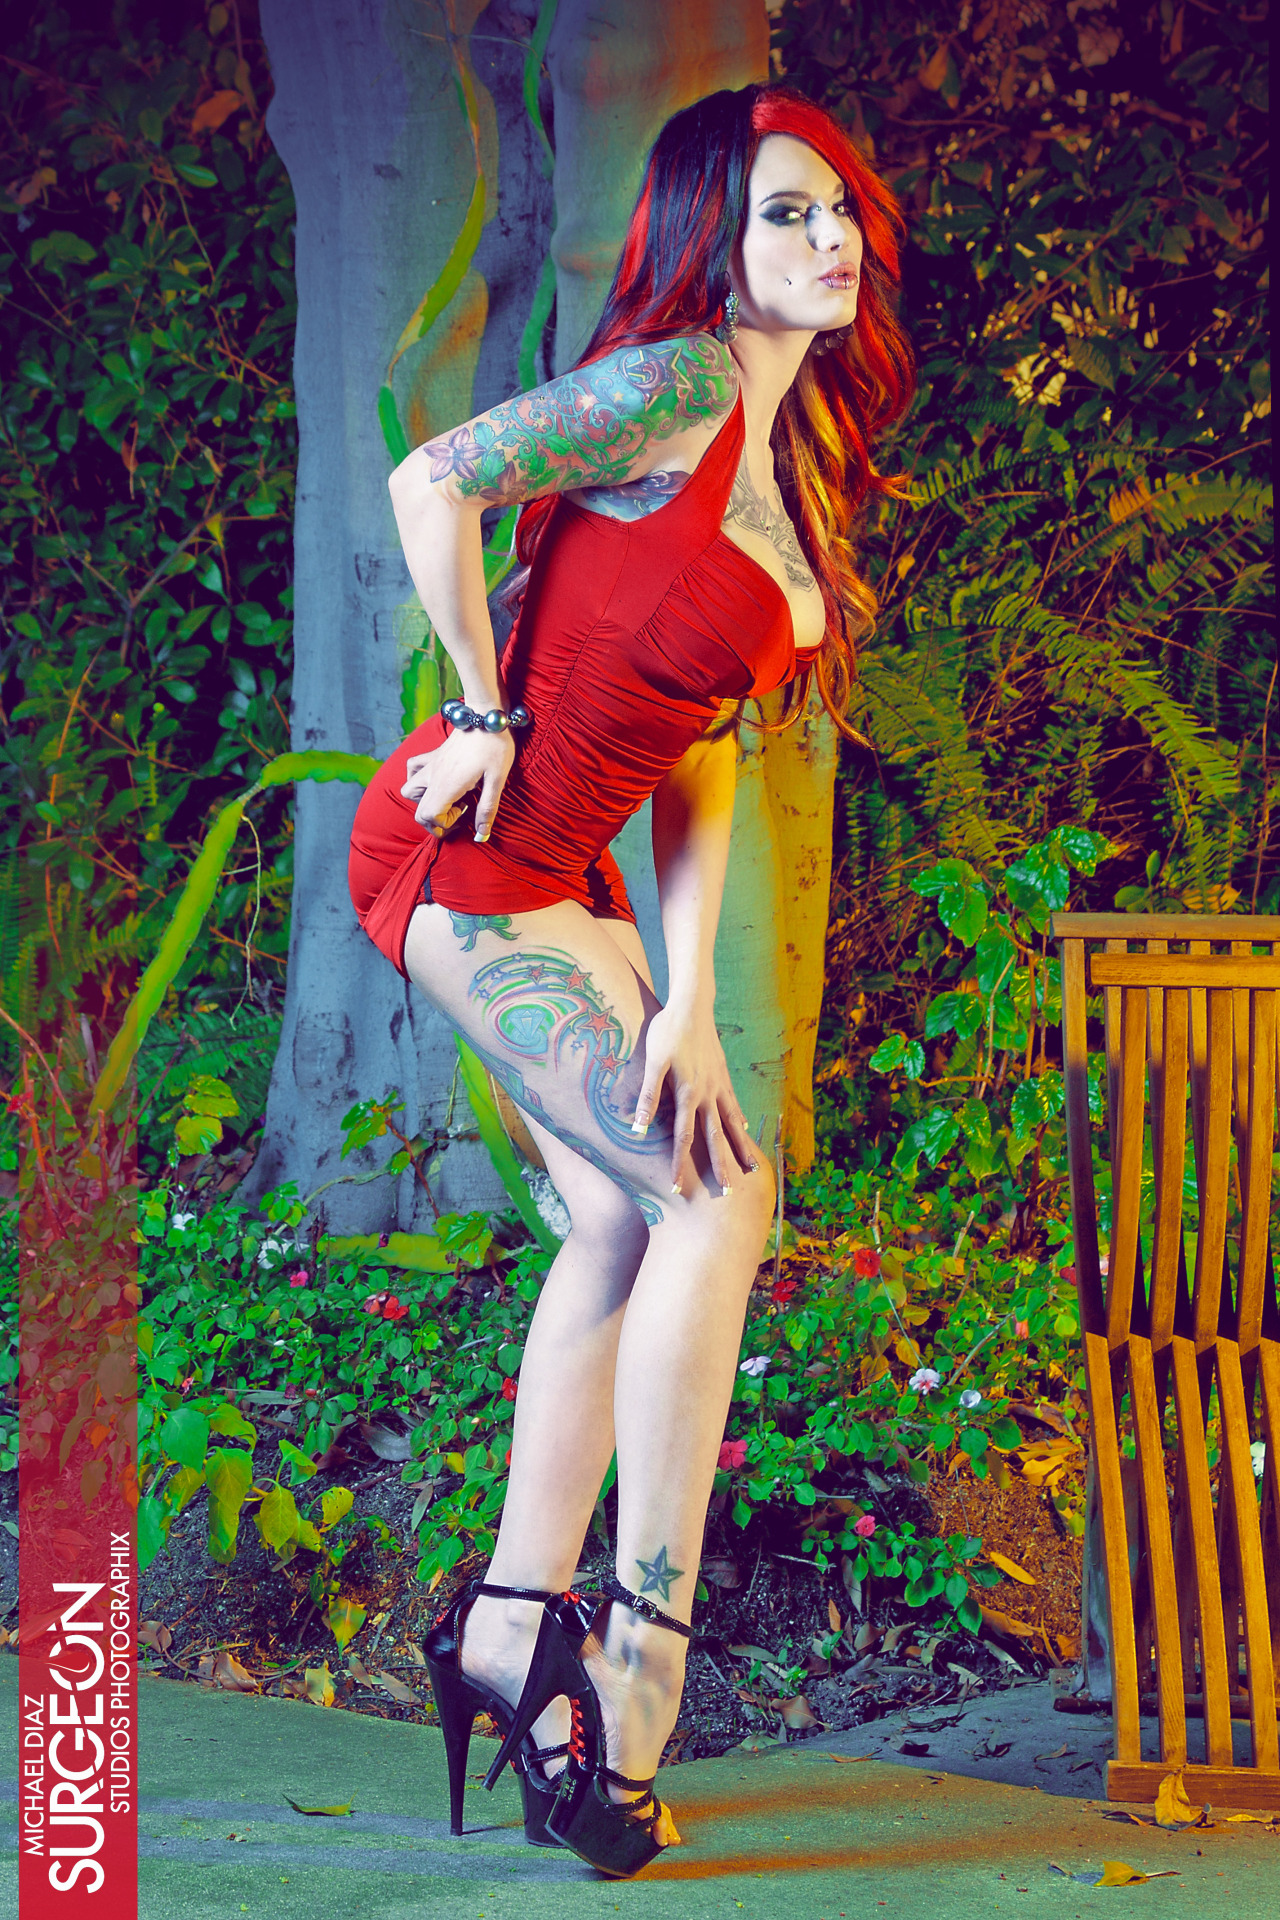 mischiefmadnessmodel:  **Lady in Red** PLEASE SHARE IF YOU LIKE!  Model: Mischief